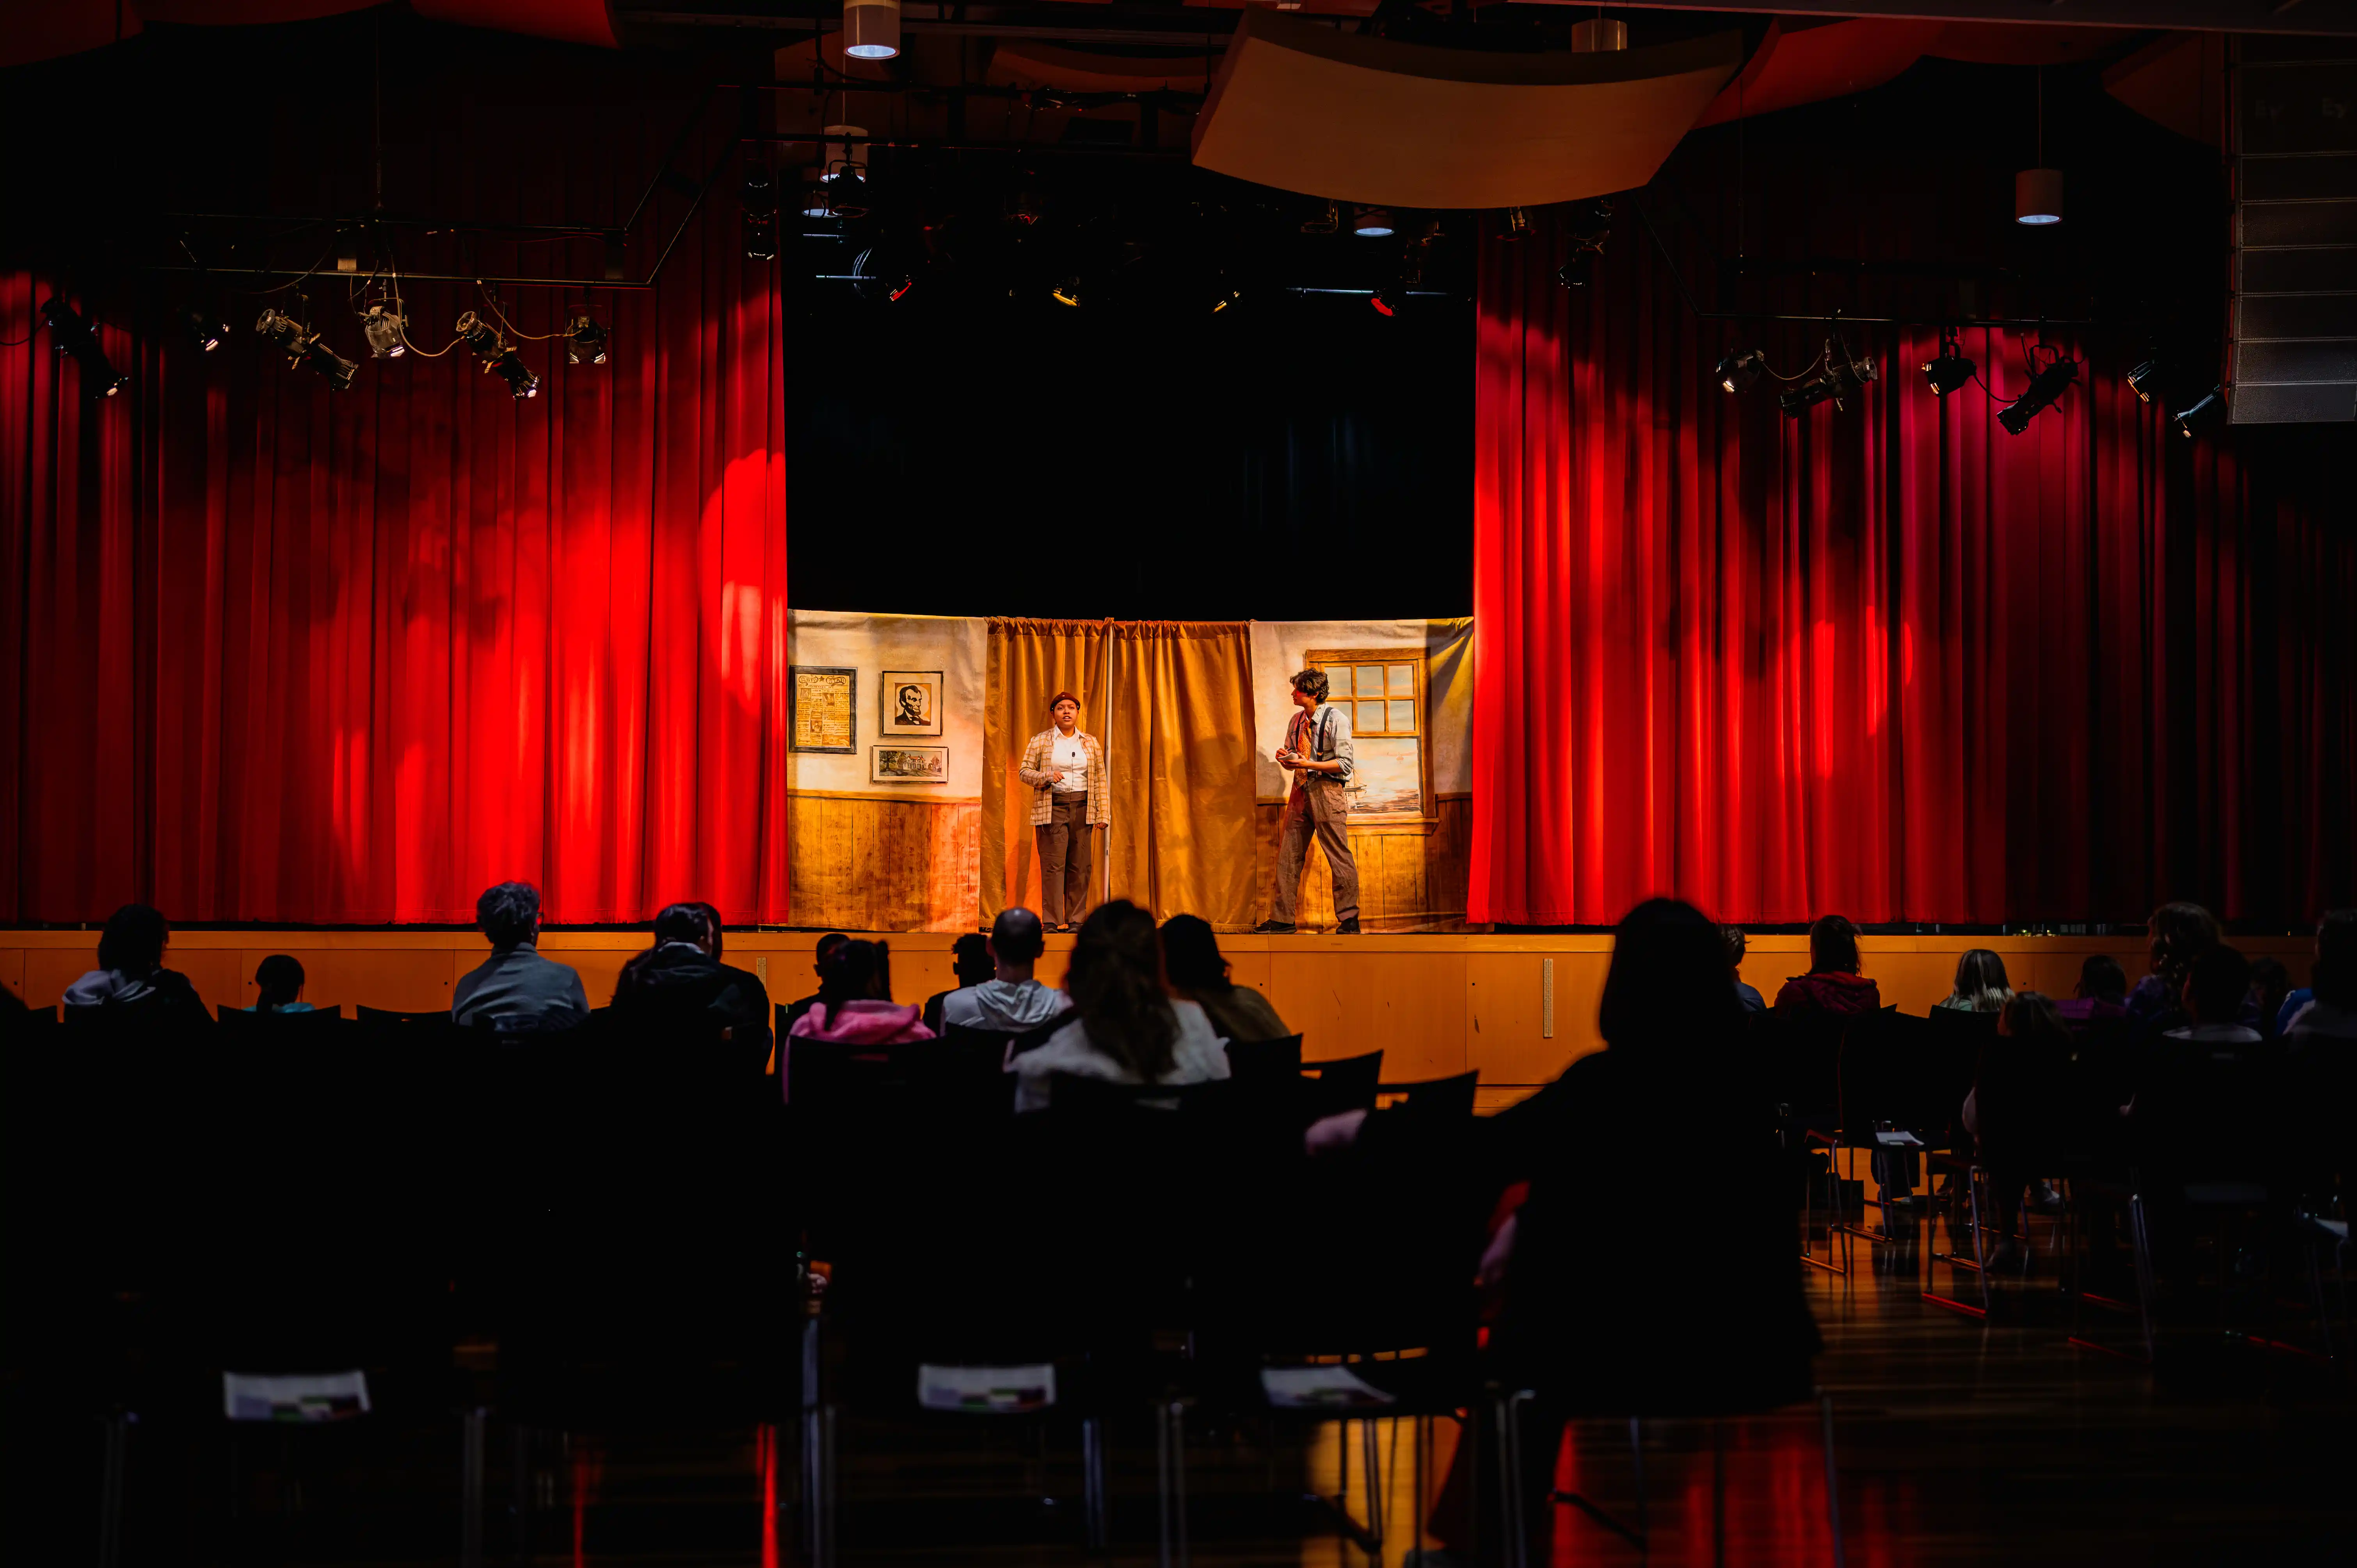 Audience sitting at tables watching a performer on a small, lit stage with red curtains.